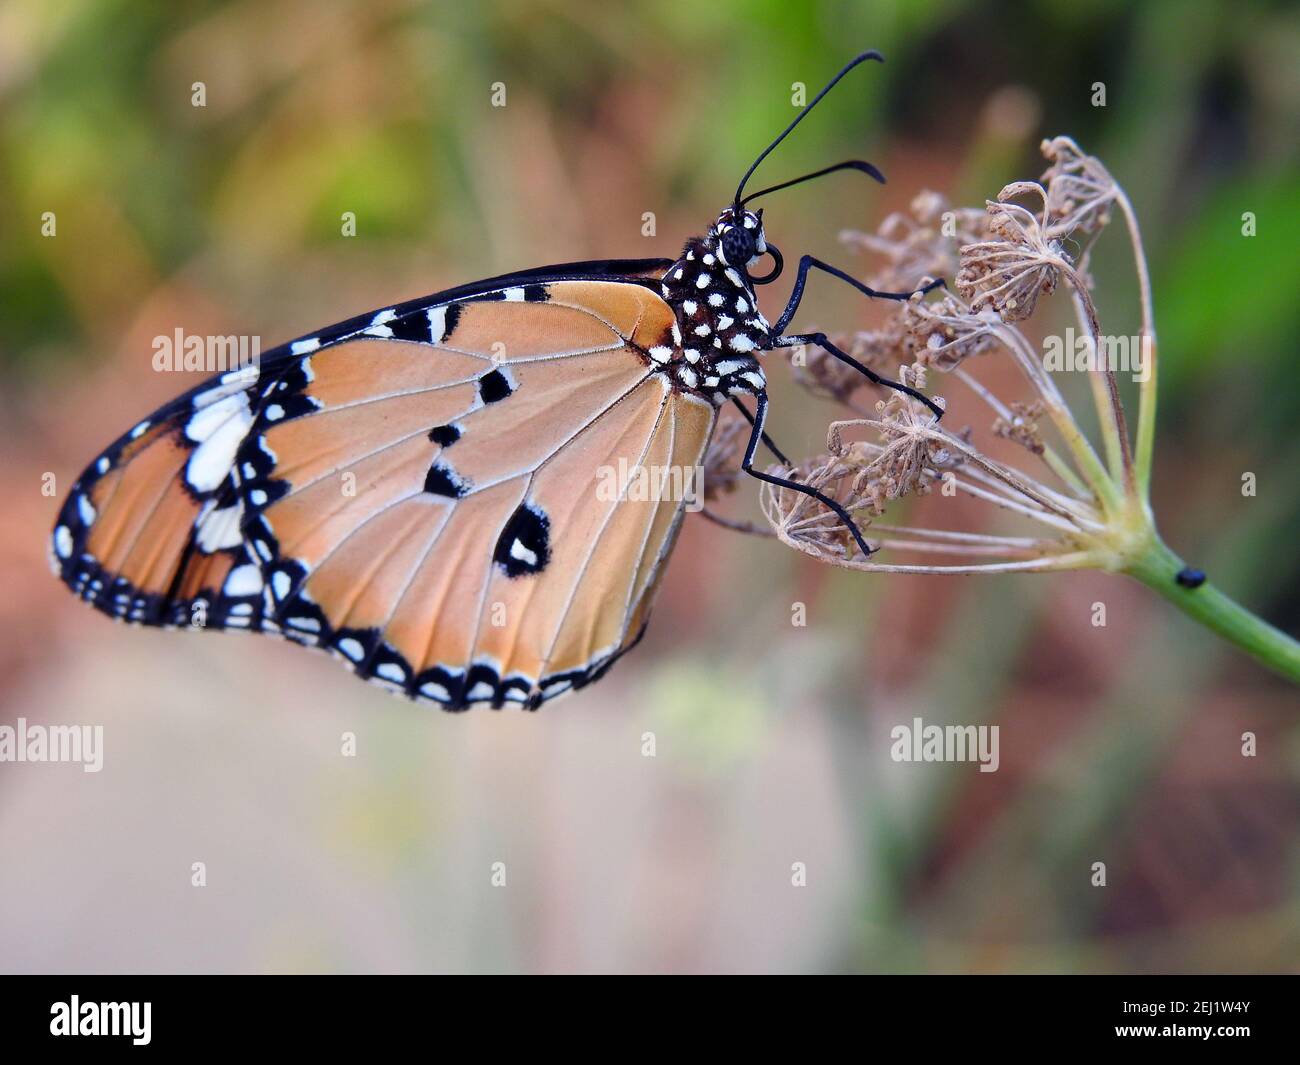 a close up view of a butterfly, Danaus chrysippus butterfly also known as plain tiger, African queen, or African Monarch consumes a plant Stock Photo